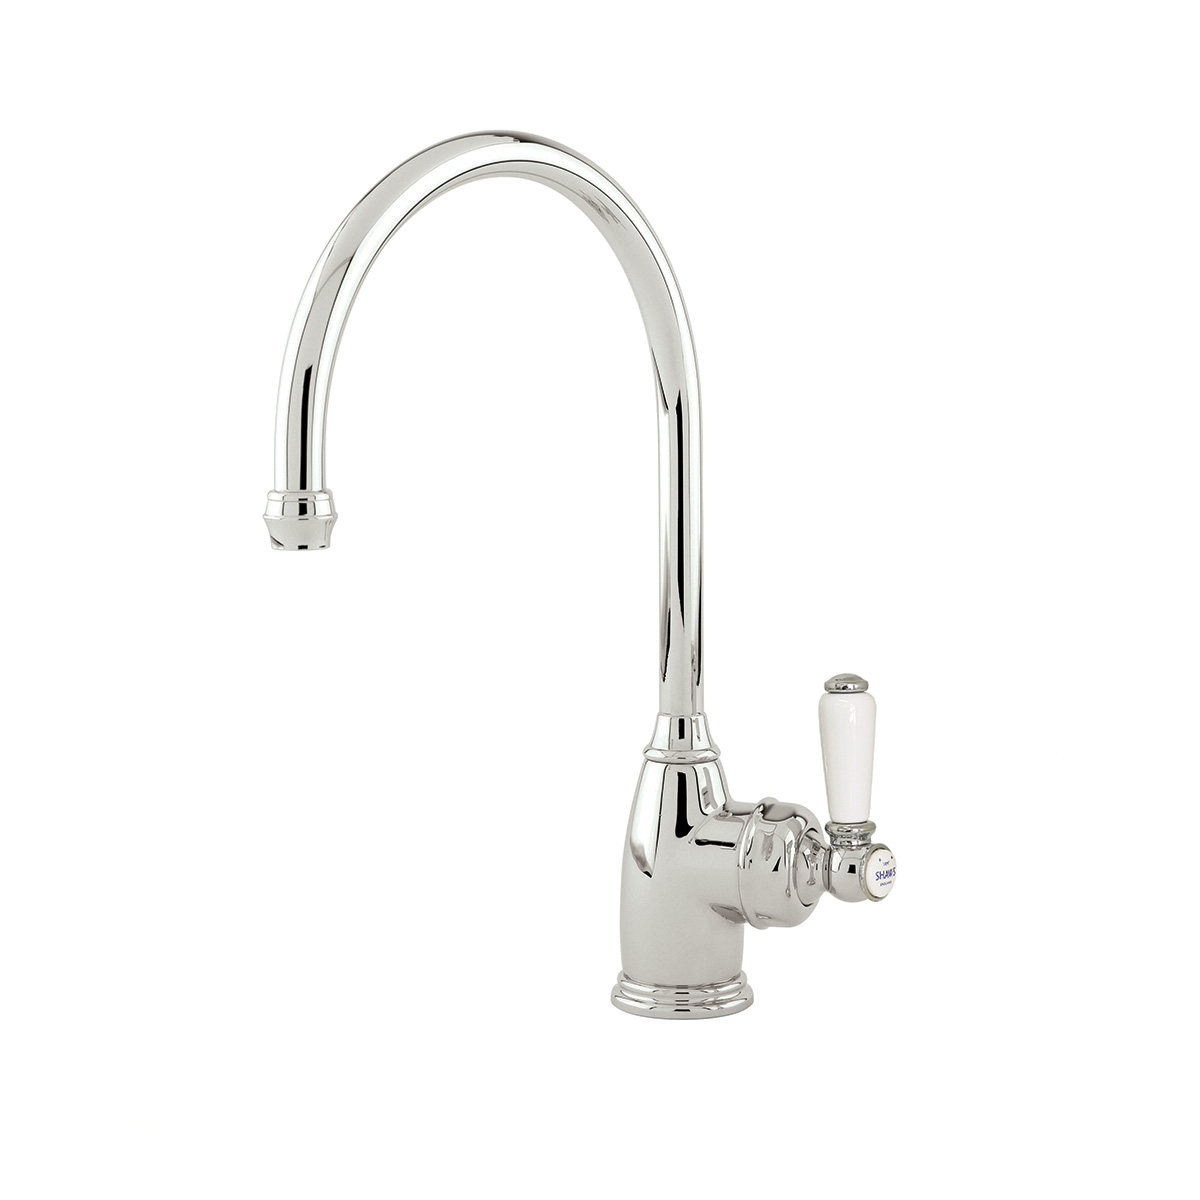 Shaws by Perrin & Rowe Yarrow kitchen mixer in Nickel. Parthian style monobloc kitchen tap AUSH.4341. Distributed in Australia by Luxe by Design, Brisbane.